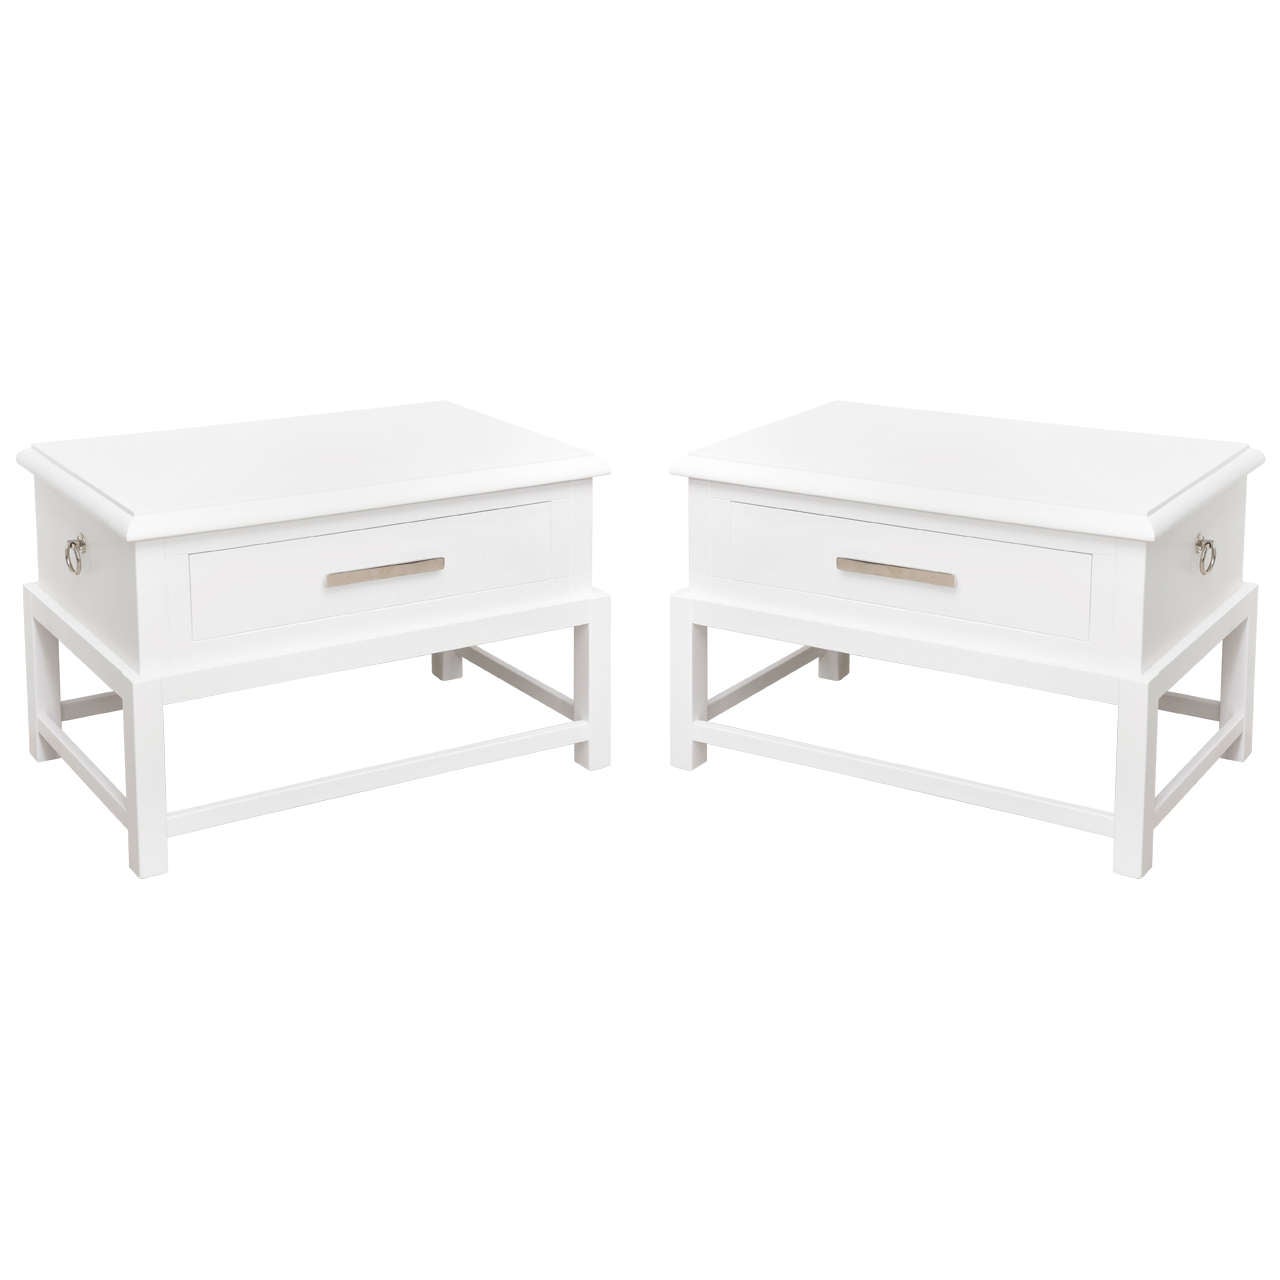 Pair of Vintage White Lacquer Bedside Tables